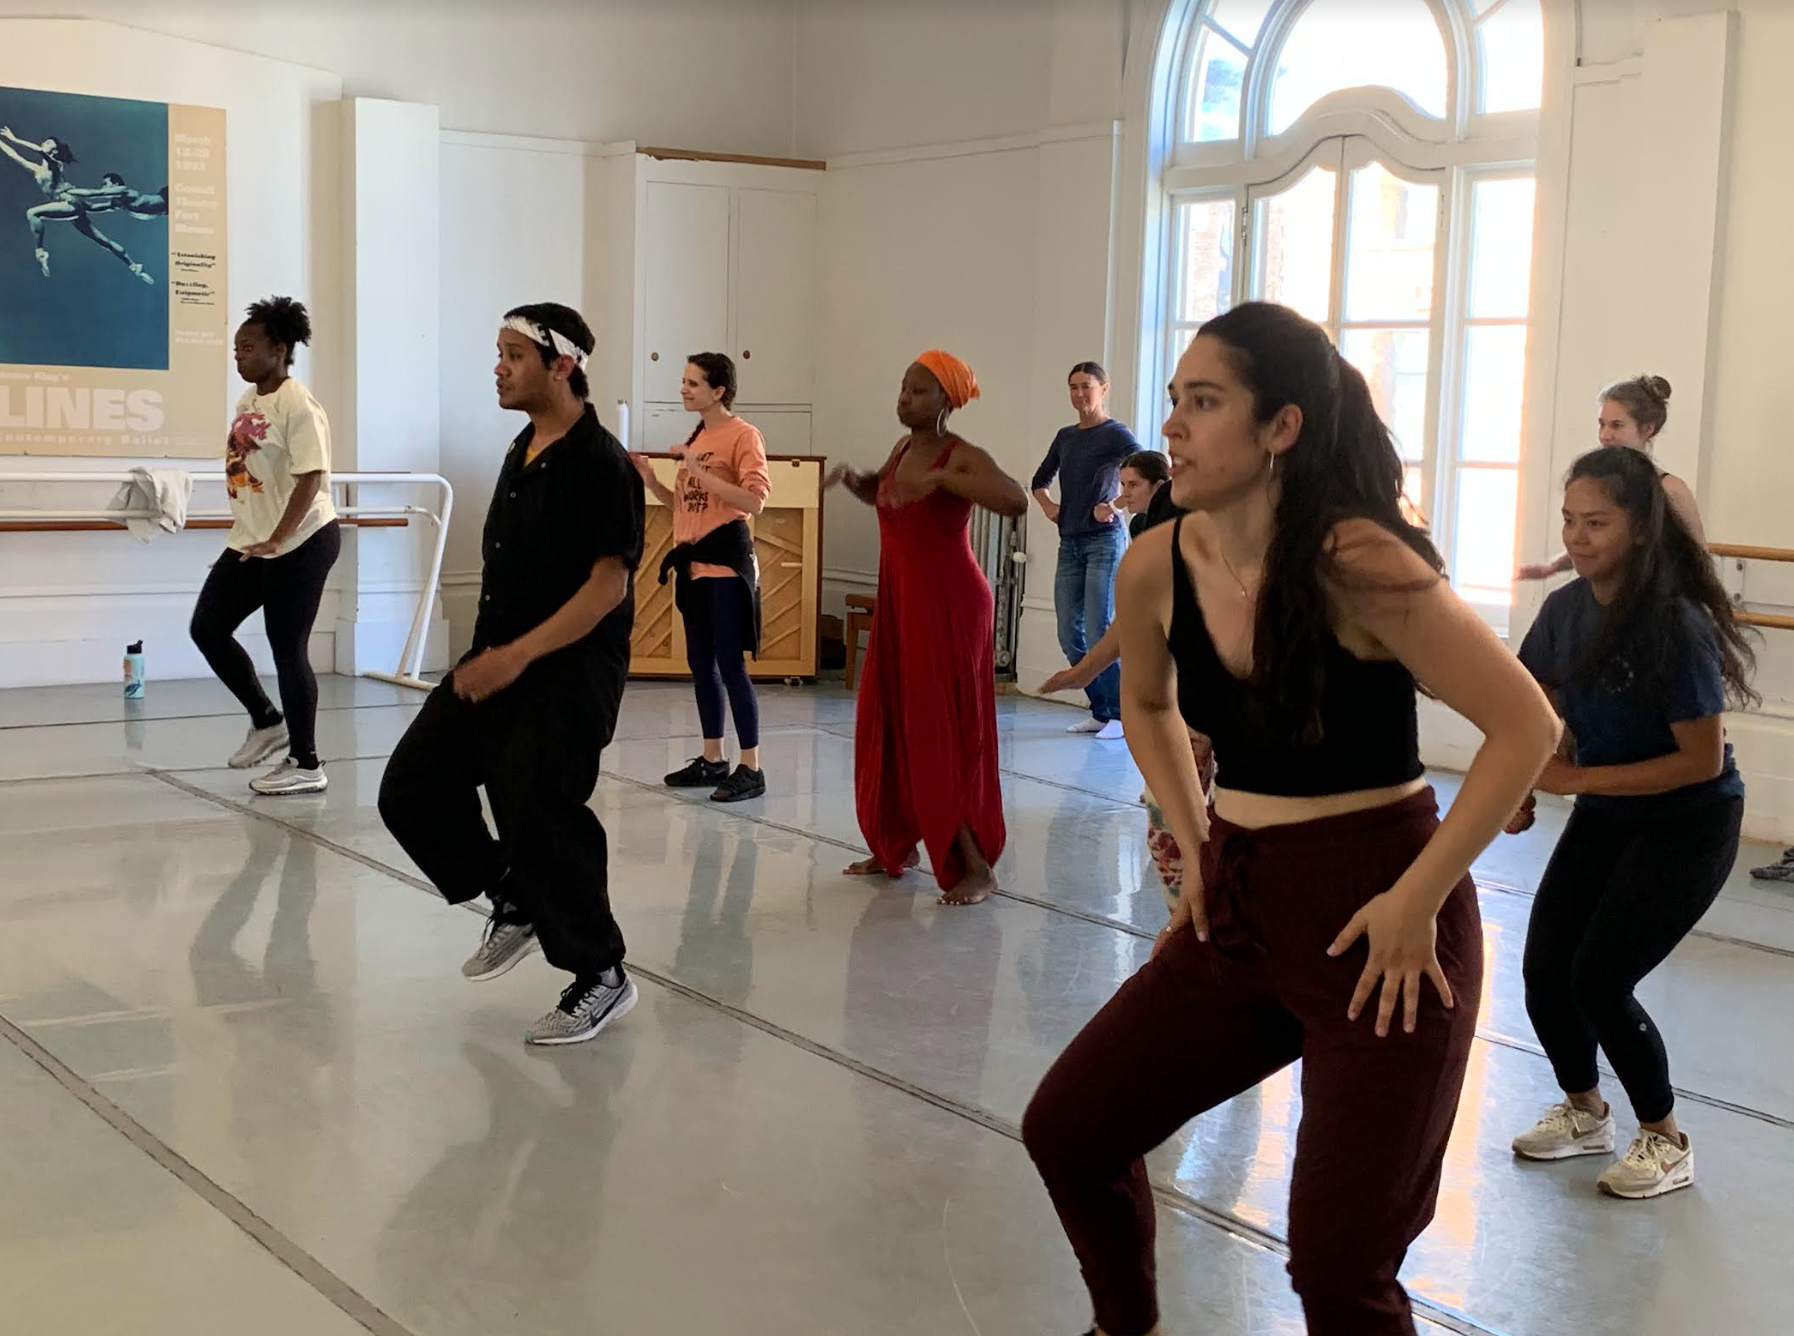 Participants and HeART with LINES faculty dancing and engaging during a Summer Dance Teaching Artist Exchange in a studio at LINES Dance Center